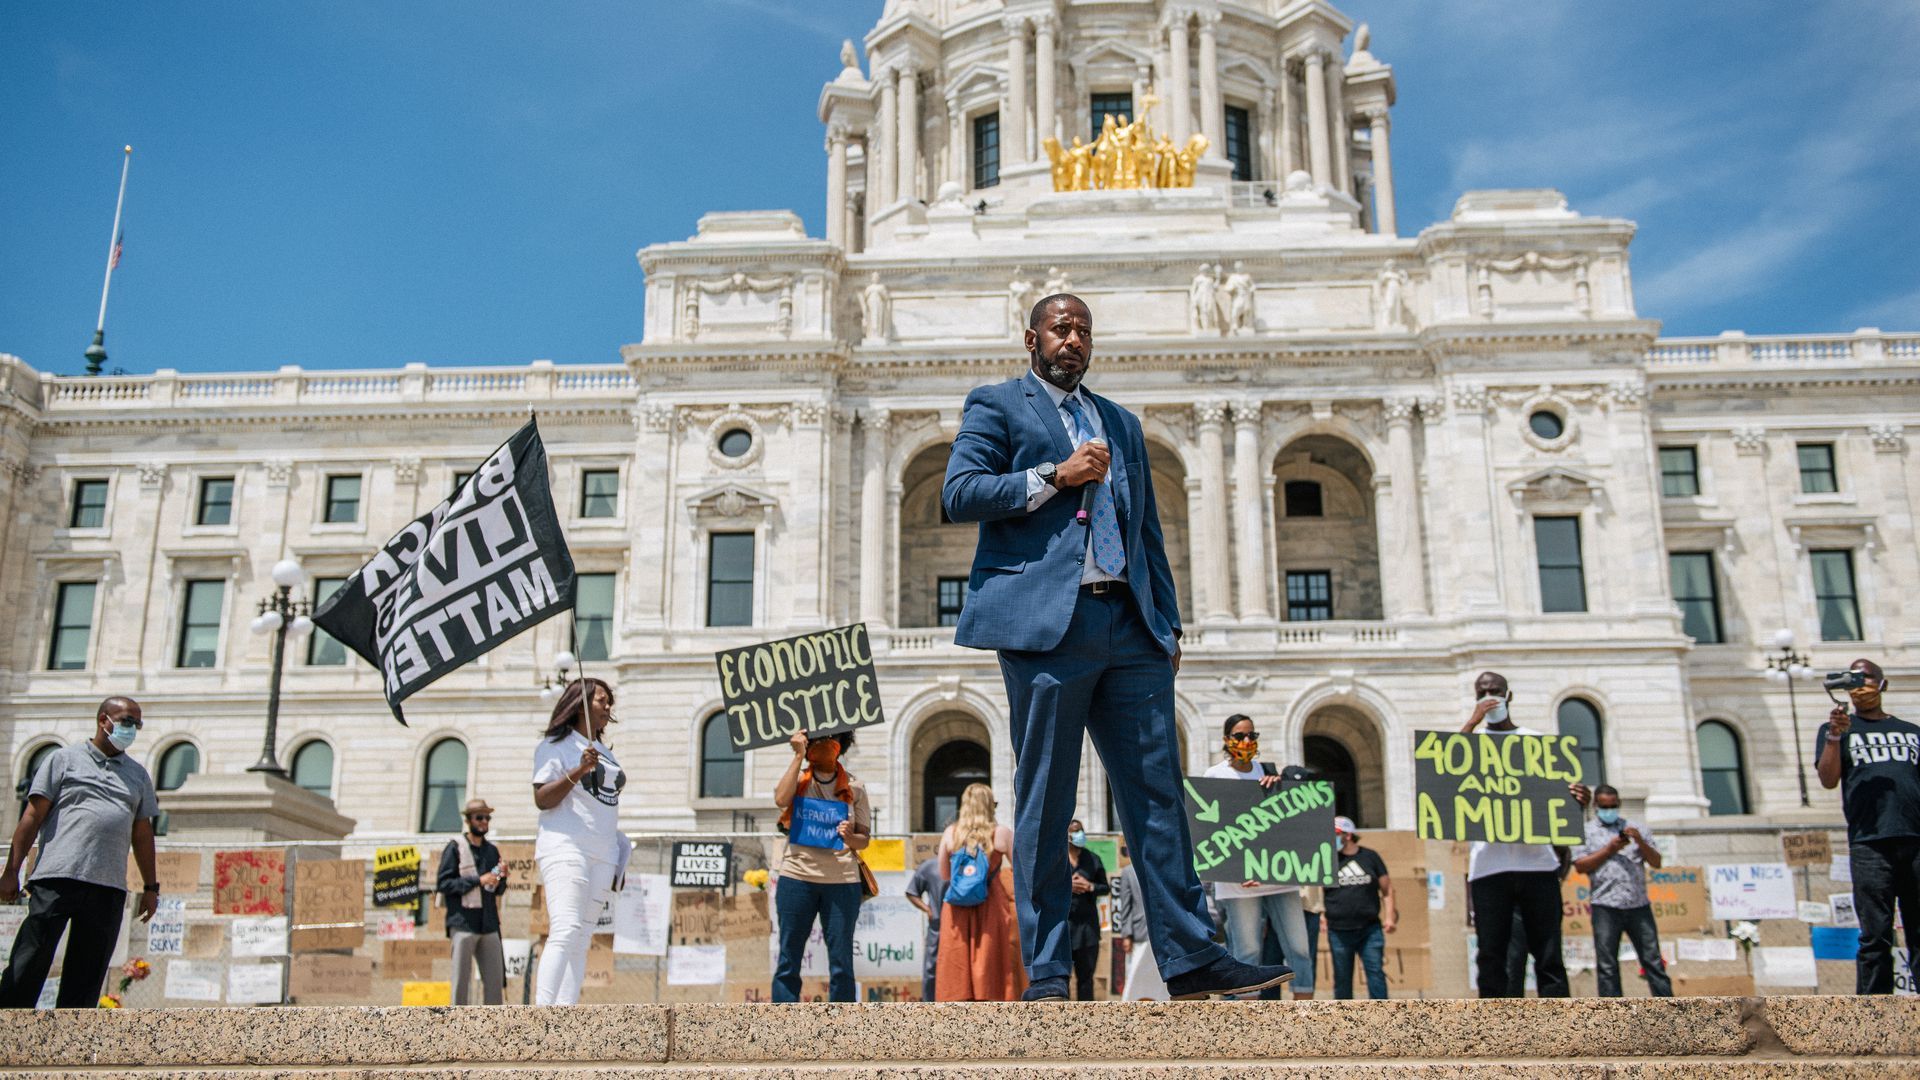 State Rep. John Thompson (DFL-St. Paul) stands in front of protesters waving signs at the Minnesota State Capitol.